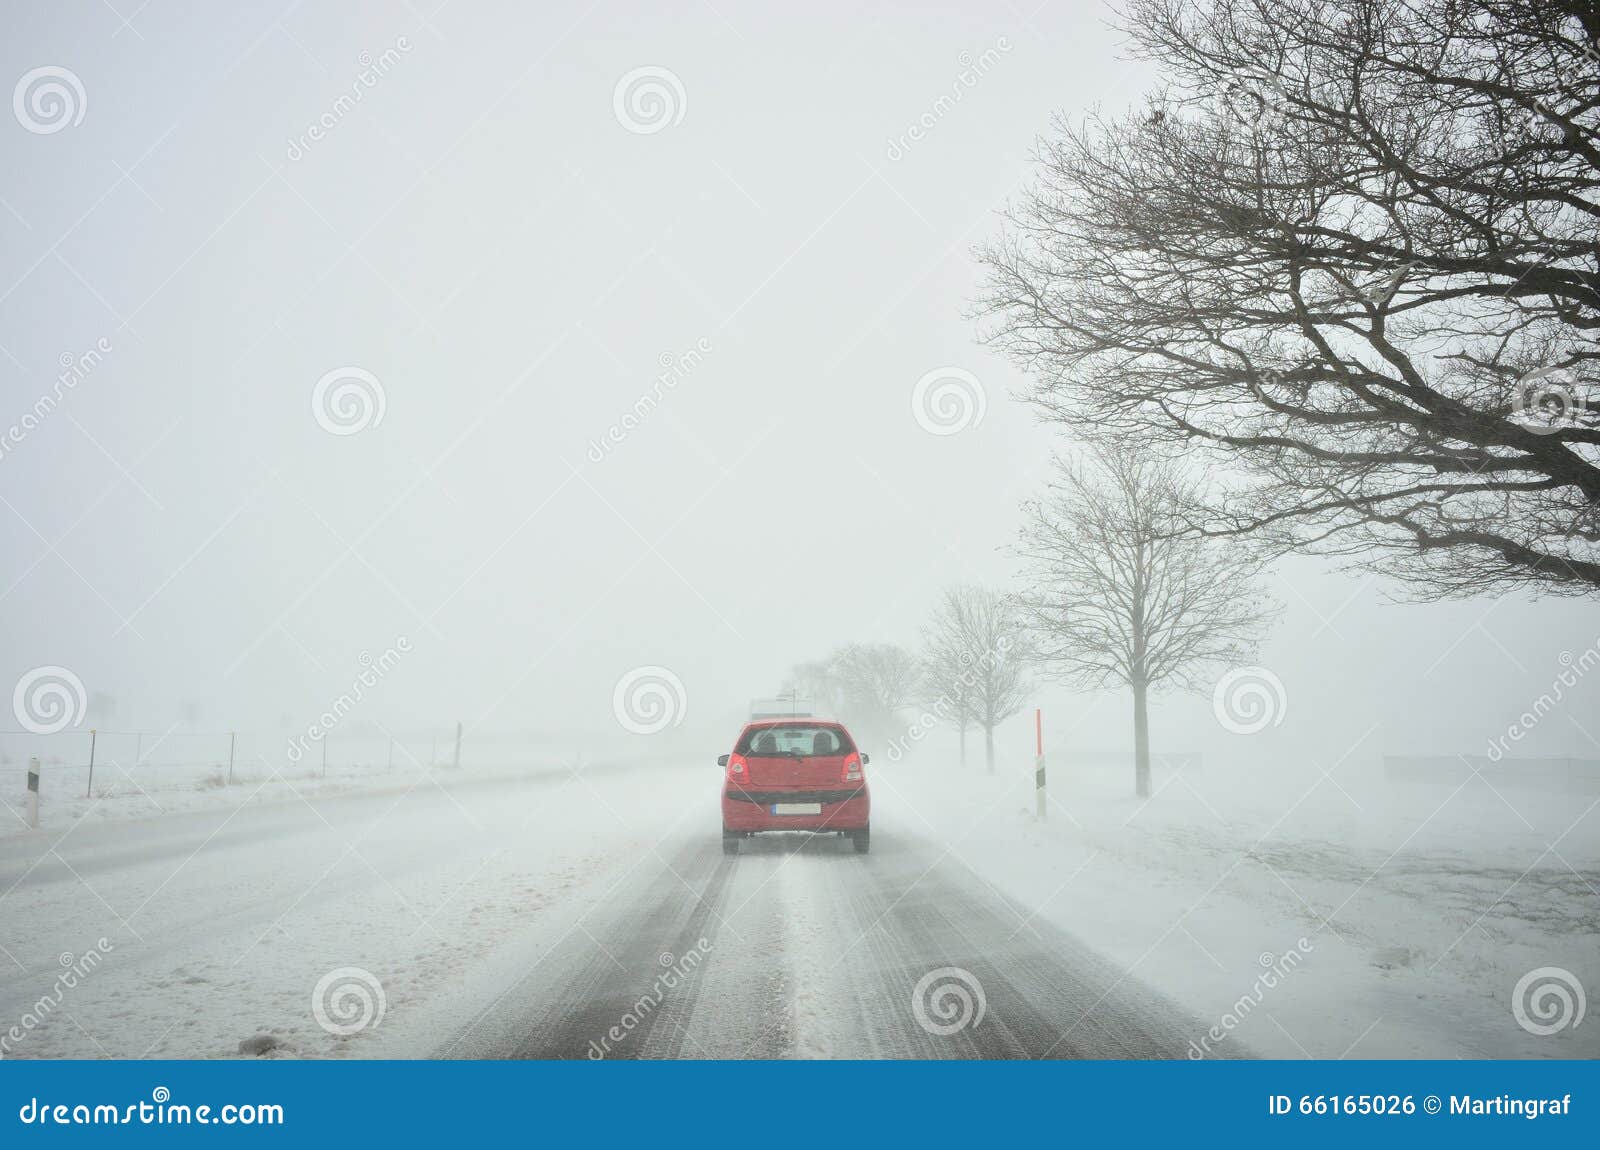 winter driving by snowstorm poor visibility